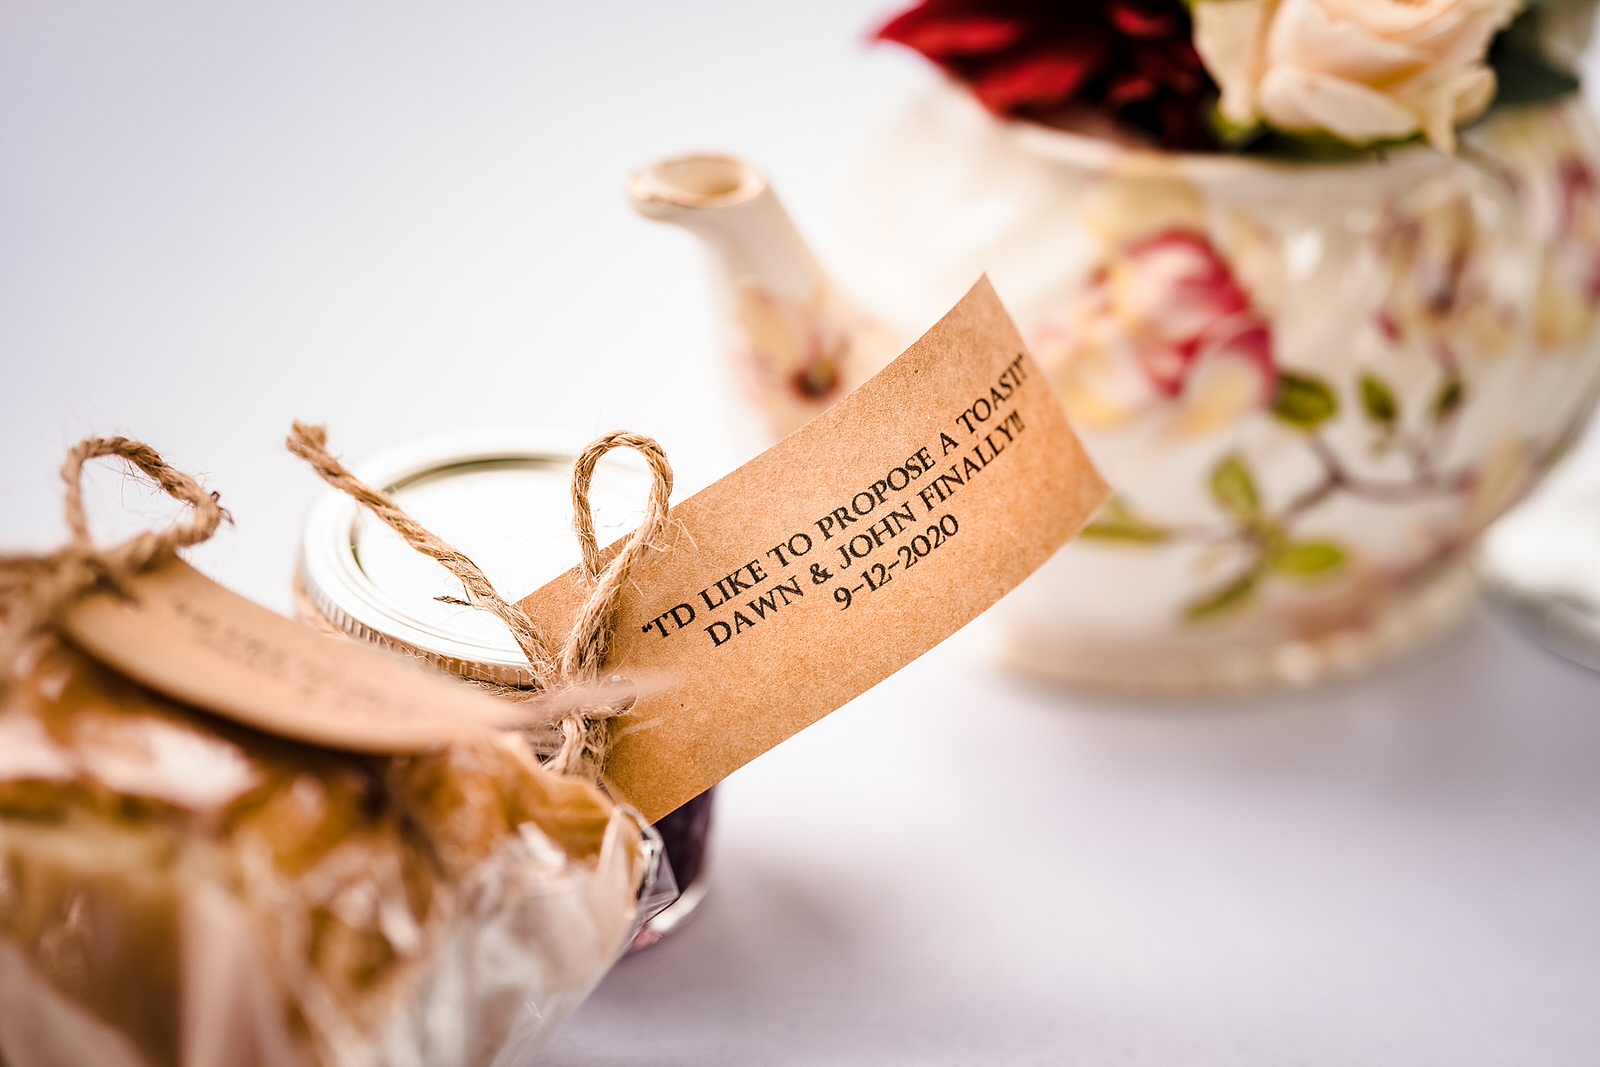 Wedding favor with a message from the couple